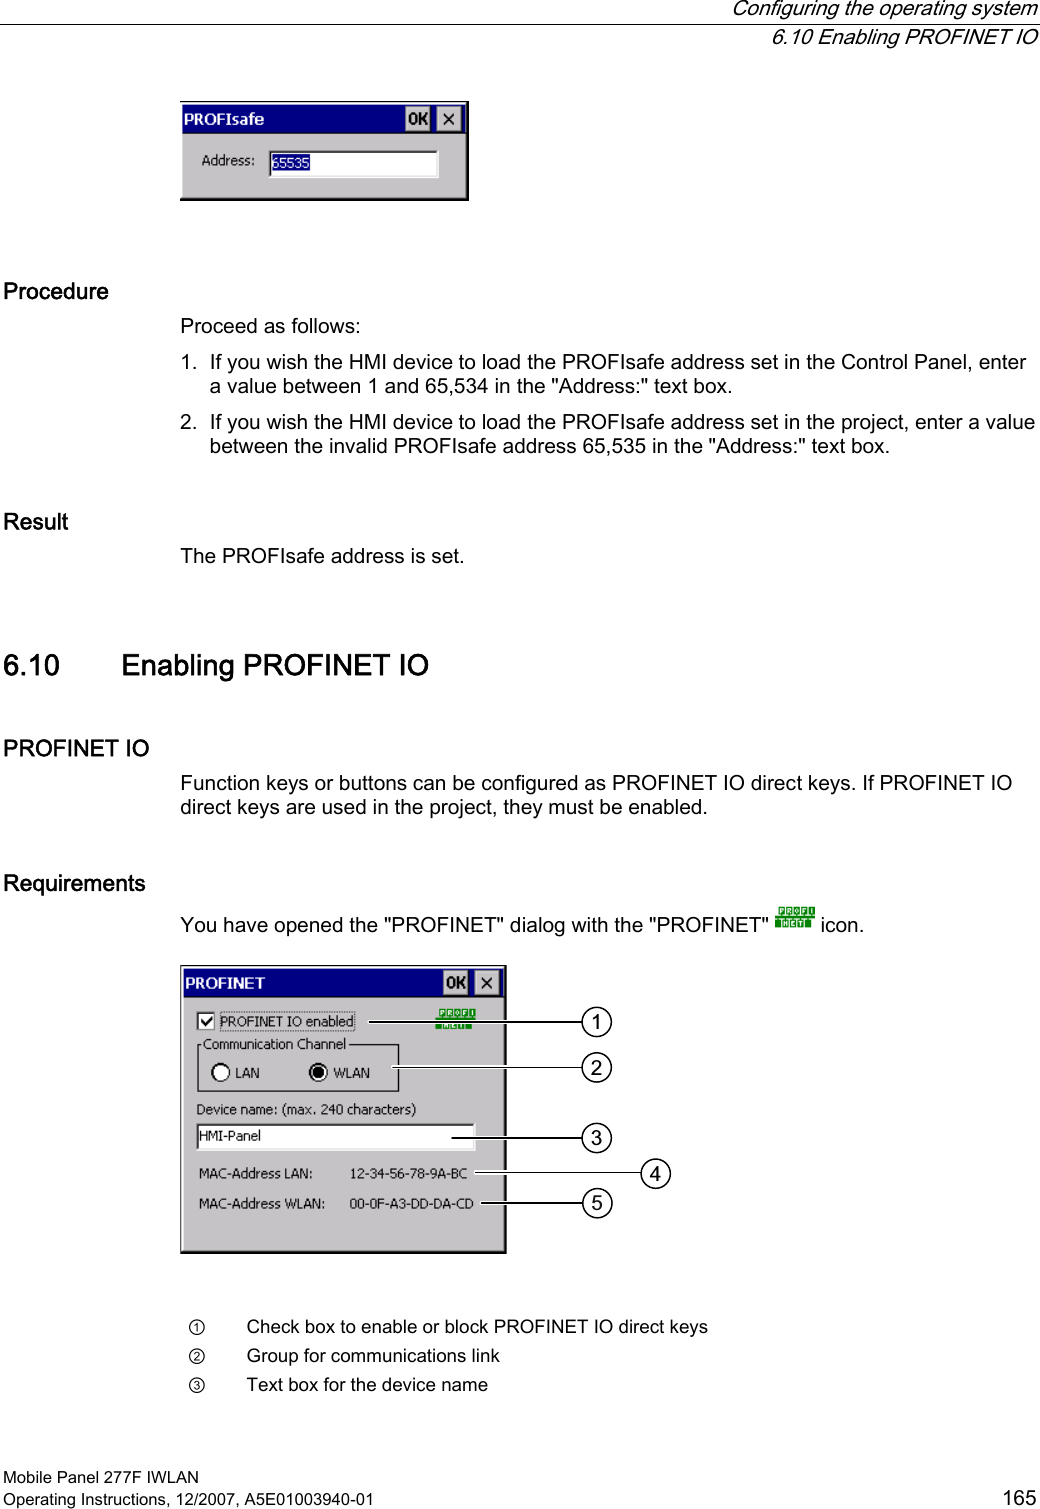  Configuring the operating system  6.10 Enabling PROFINET IO Mobile Panel 277F IWLAN Operating Instructions, 12/2007, A5E01003940-01  165   Procedure Proceed as follows: 1. If you wish the HMI device to load the PROFIsafe address set in the Control Panel, enter a value between 1 and 65,534 in the &quot;Address:&quot; text box. 2. If you wish the HMI device to load the PROFIsafe address set in the project, enter a value between the invalid PROFIsafe address 65,535 in the &quot;Address:&quot; text box. Result The PROFIsafe address is set.  6.10 Enabling PROFINET IO PROFINET IO Function keys or buttons can be configured as PROFINET IO direct keys. If PROFINET IO direct keys are used in the project, they must be enabled. Requirements You have opened the &quot;PROFINET&quot; dialog with the &quot;PROFINET&quot;   icon.    ①  Check box to enable or block PROFINET IO direct keys ②  Group for communications link ③  Text box for the device name 